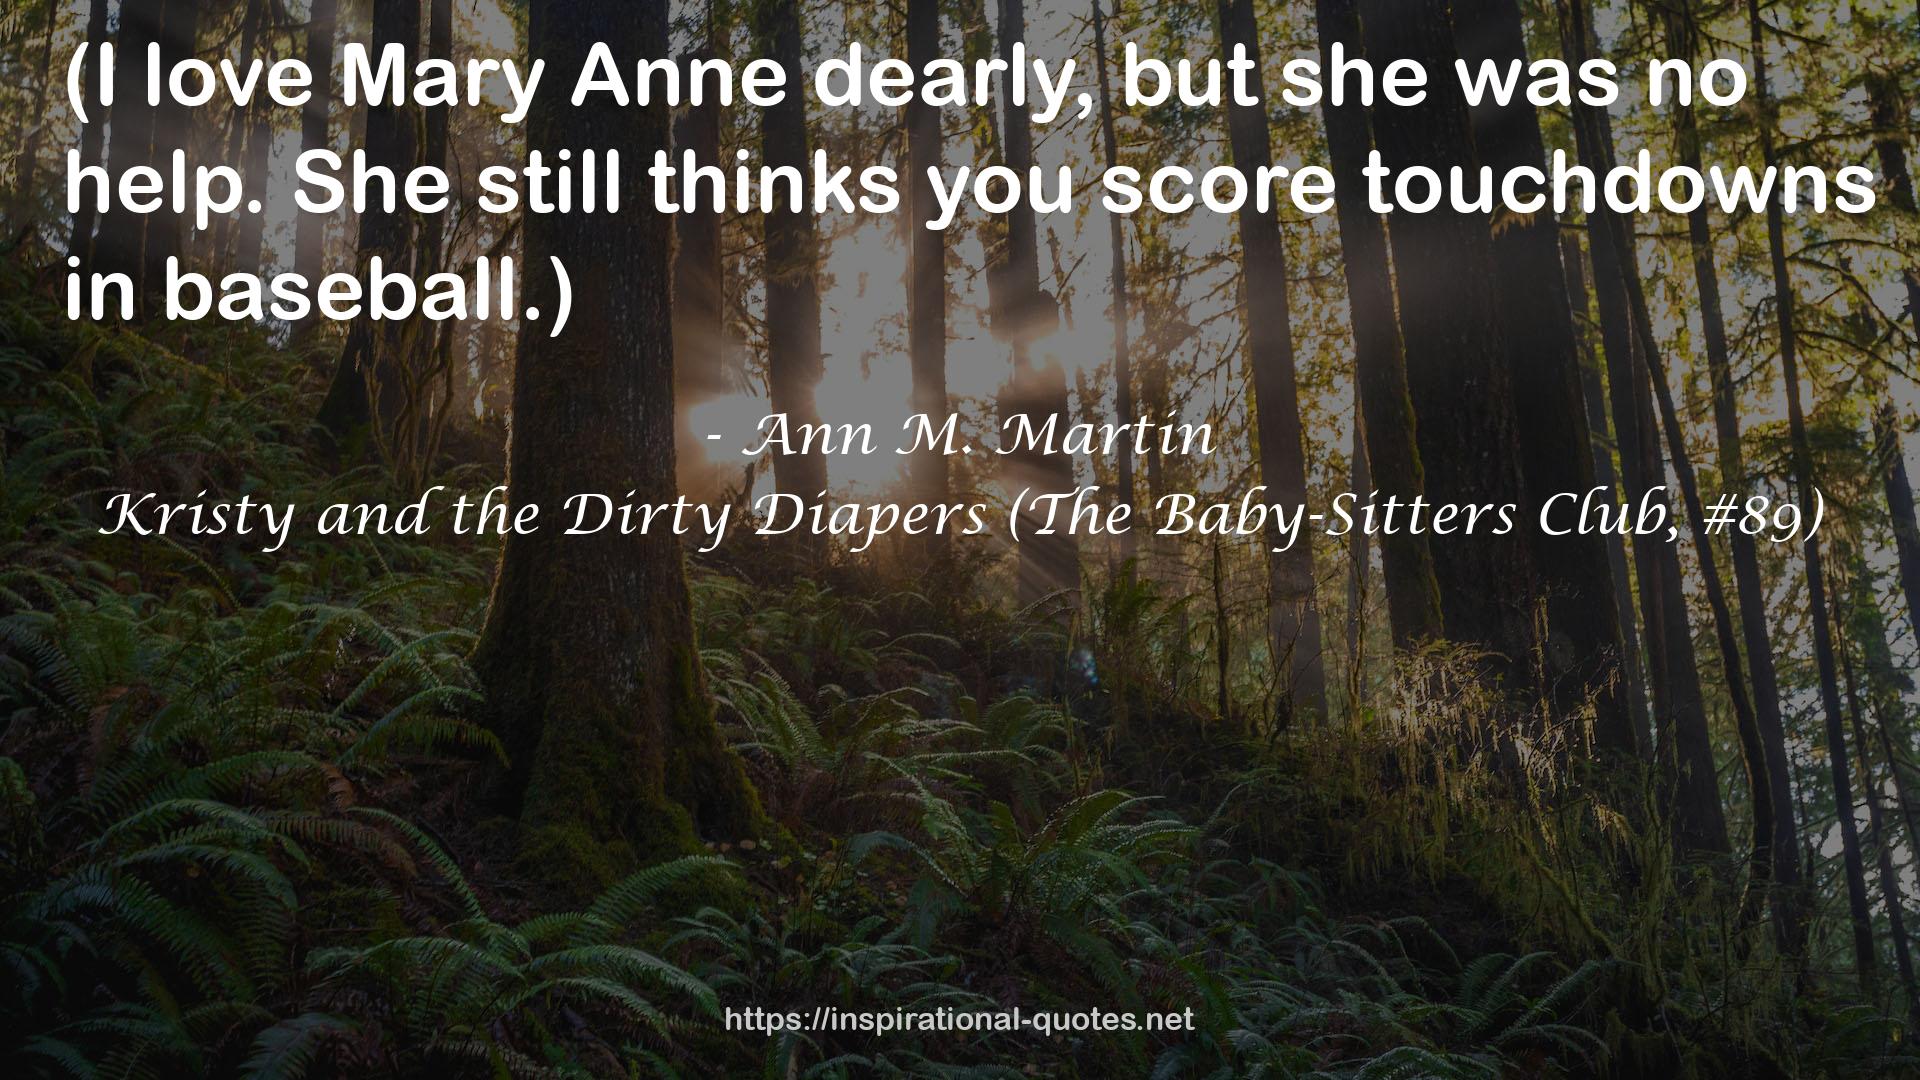 Kristy and the Dirty Diapers (The Baby-Sitters Club, #89) QUOTES